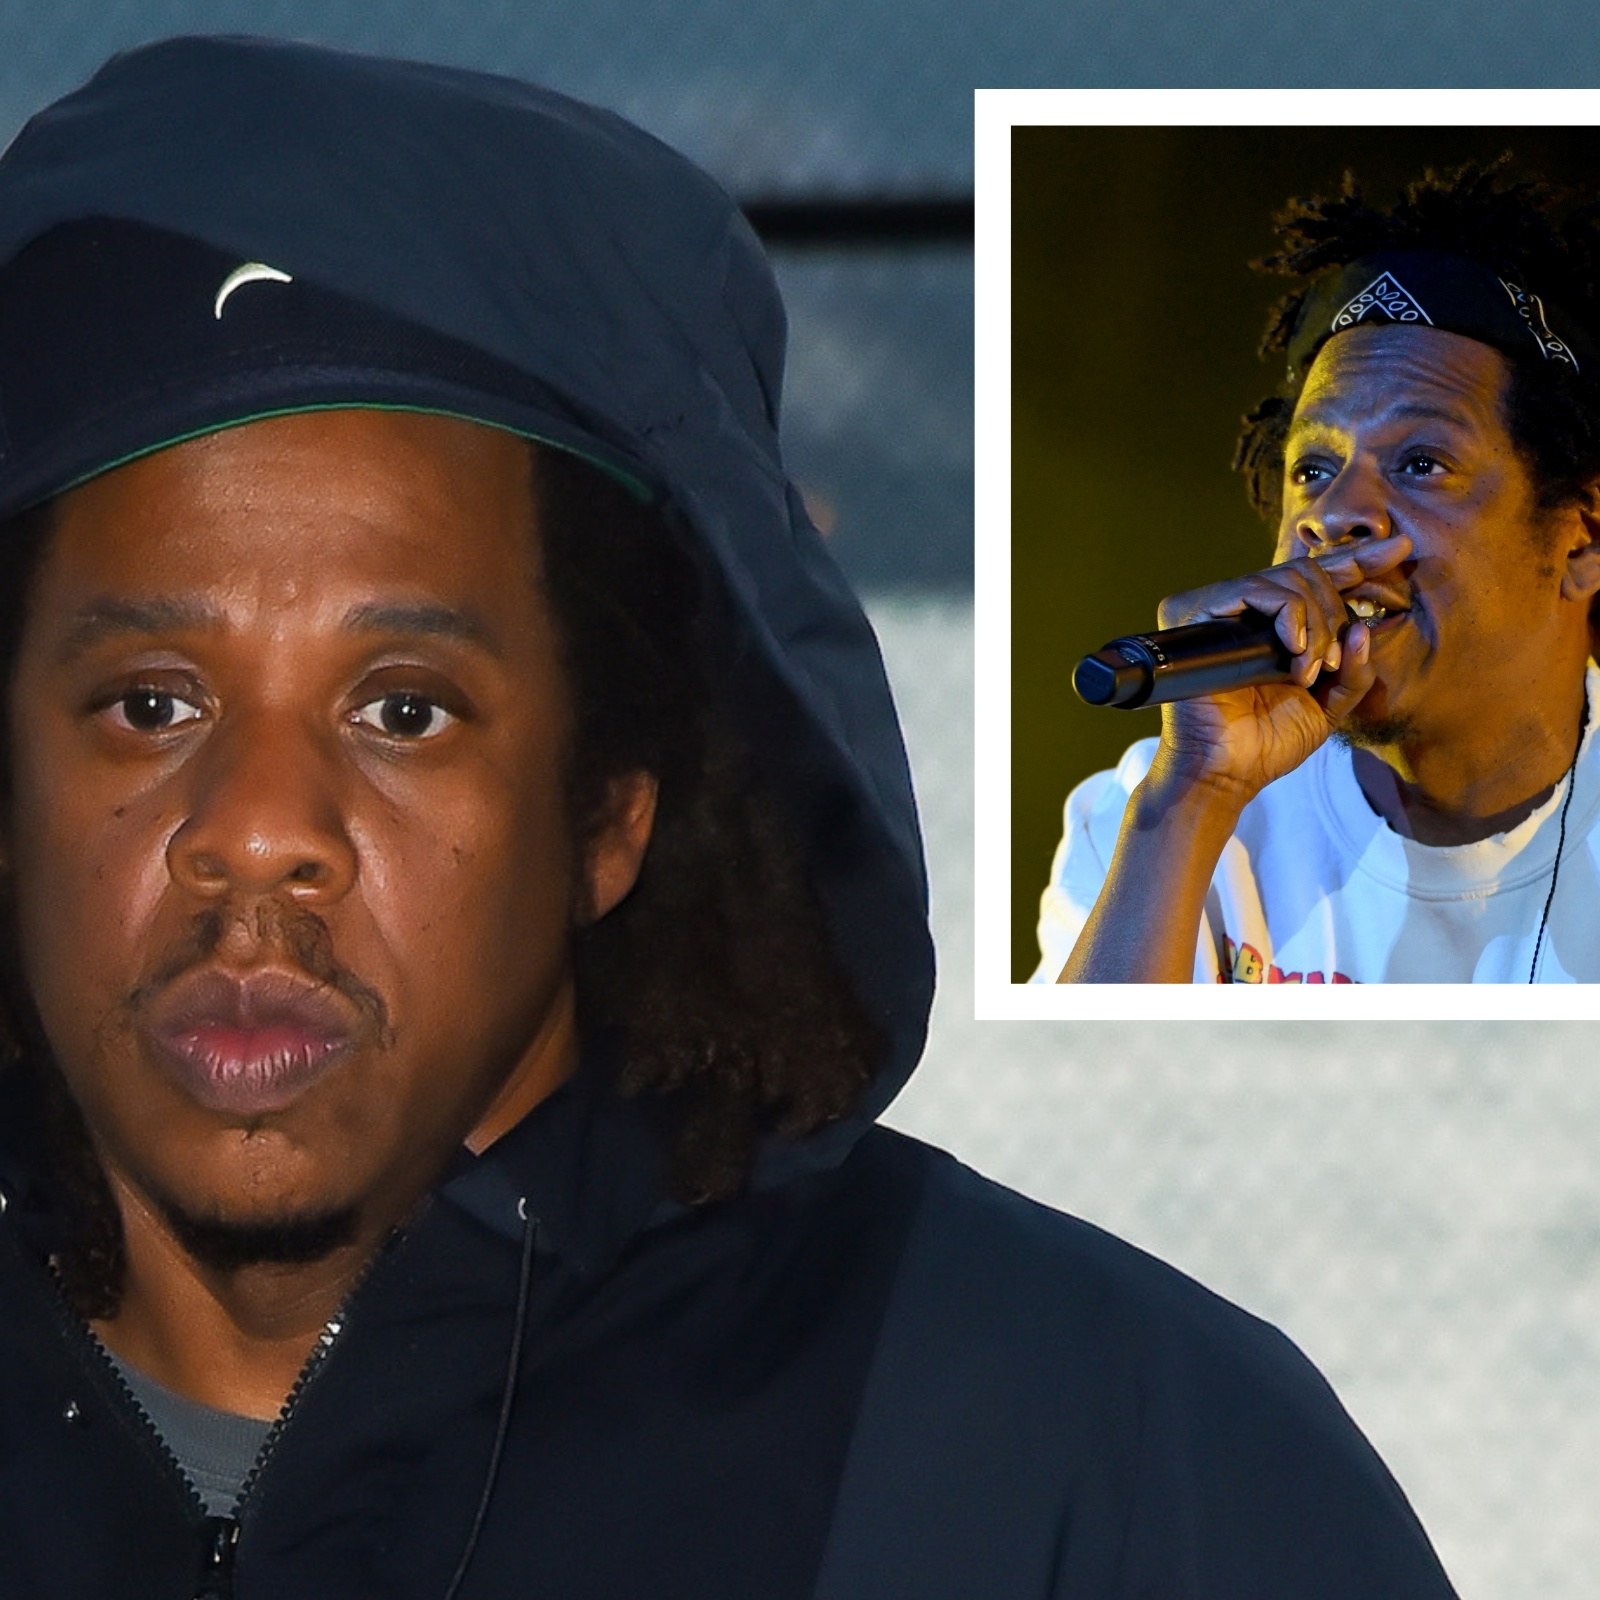 Black Rapper Jay-Z (who Idolizes Che Guevara with T-shirt